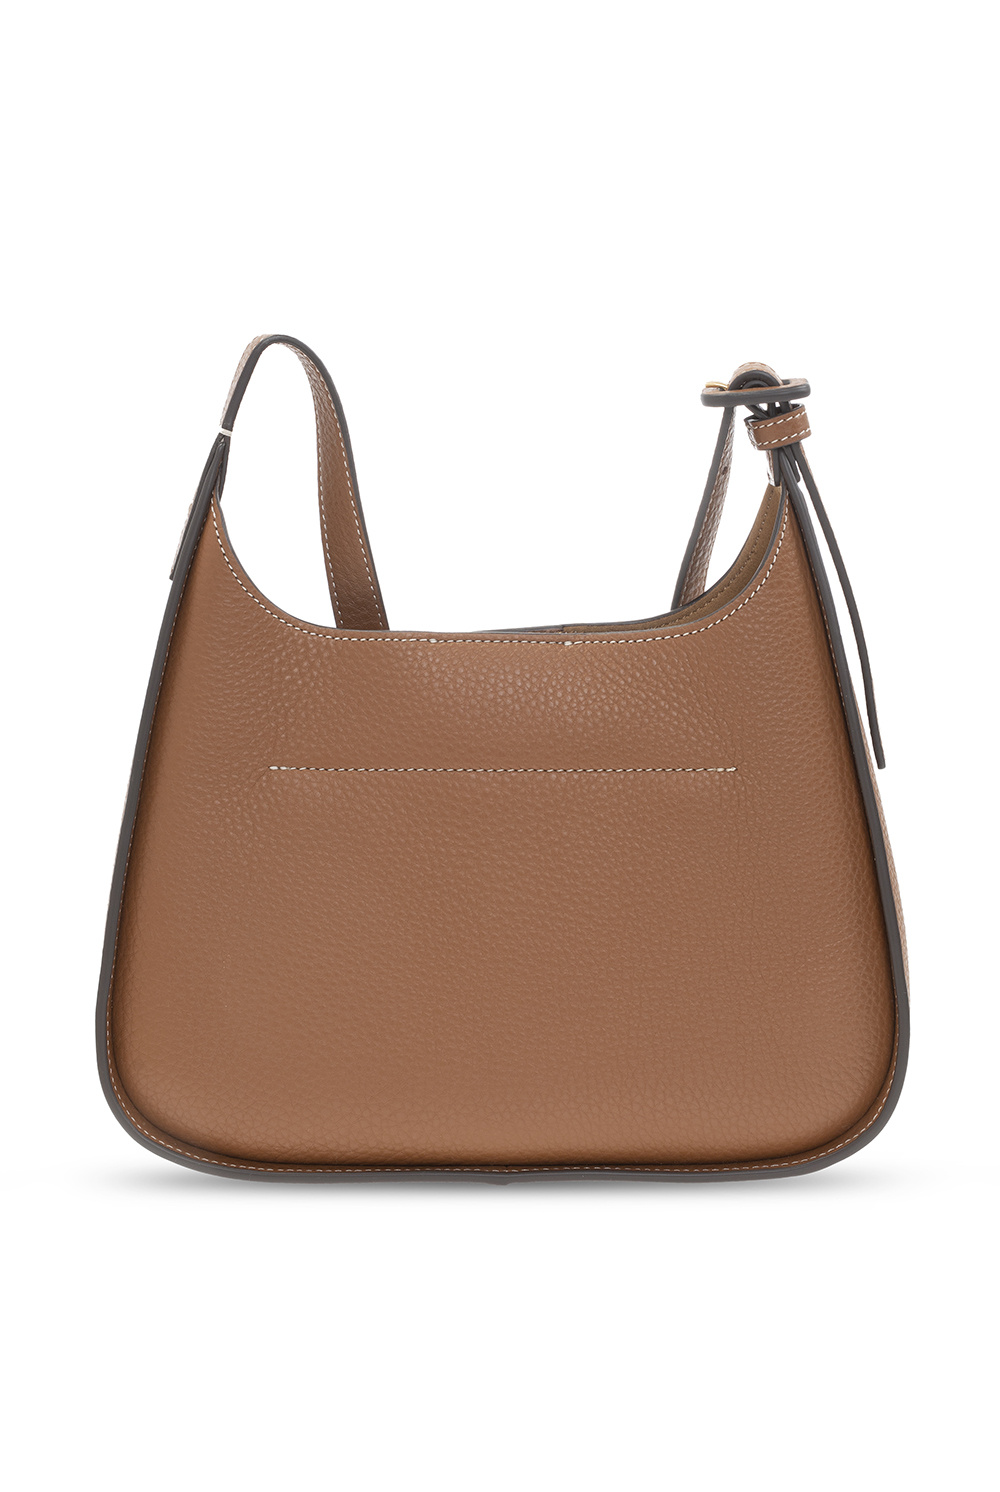 Hermes Hand Bag Haut a courroies 32 Browns Leather